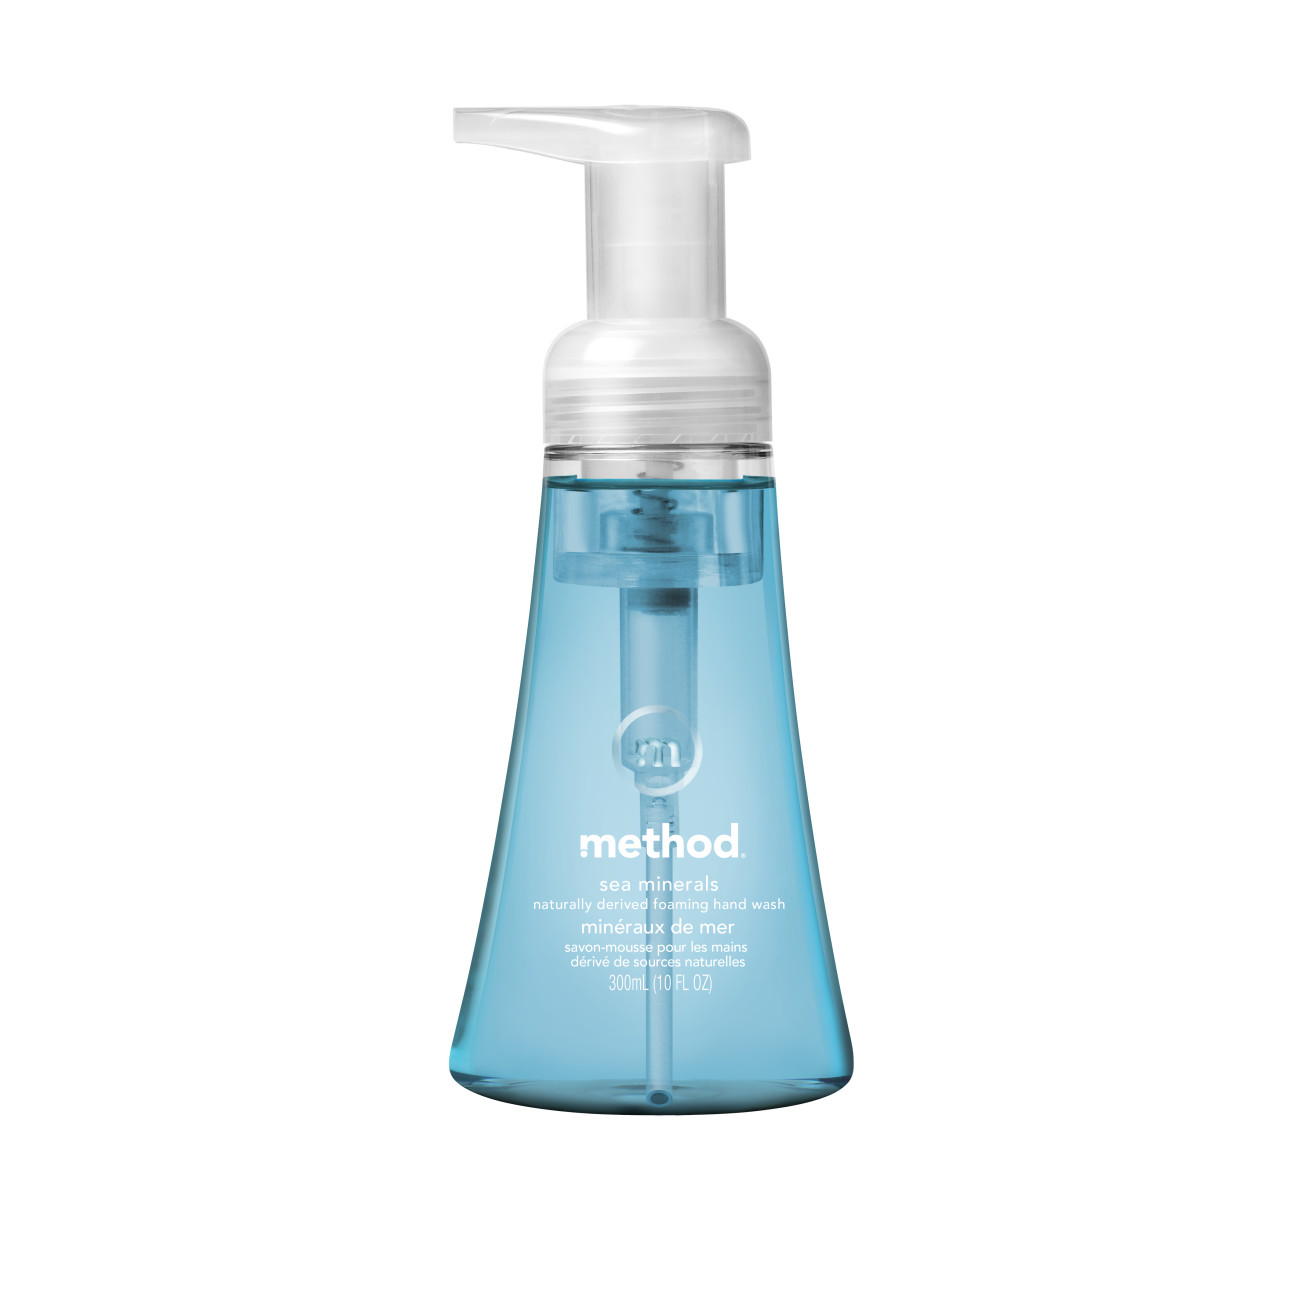 Method Foaming Hand Soap, Sea Minerals, 10 Ounce - image 1 of 5